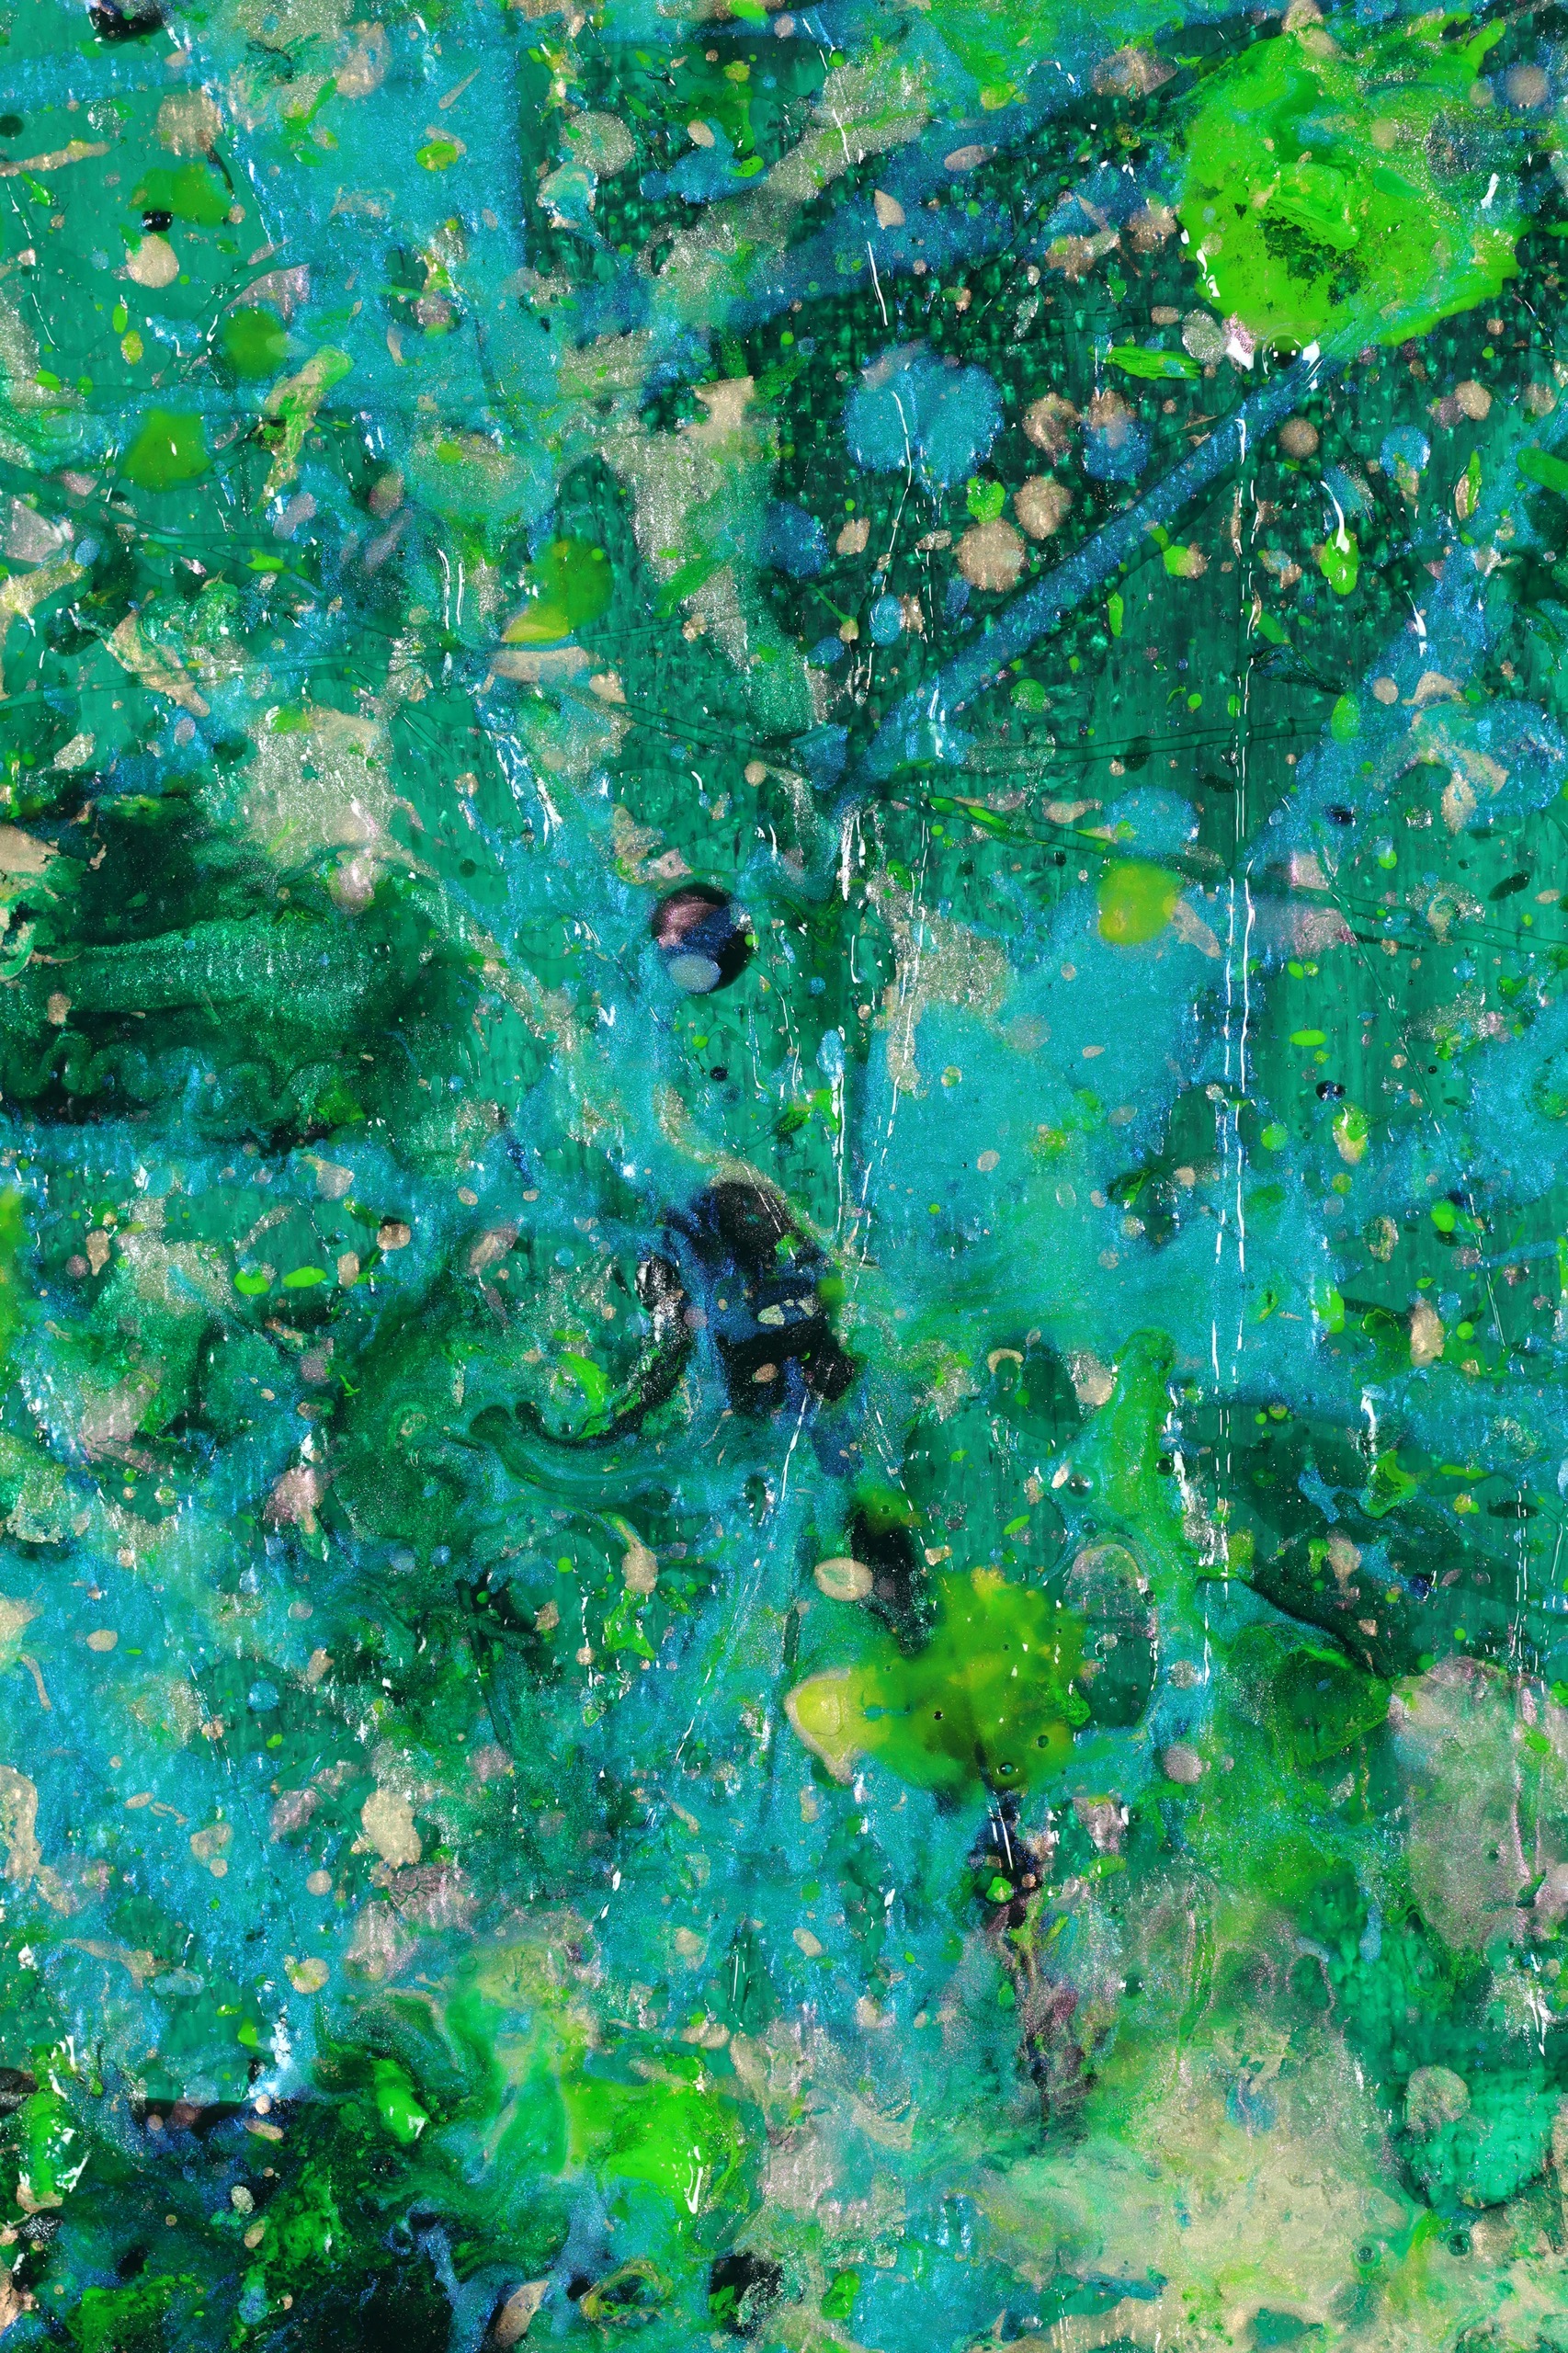 Tangled Up In Green (2023) / Diptych / 48 x 36 inches